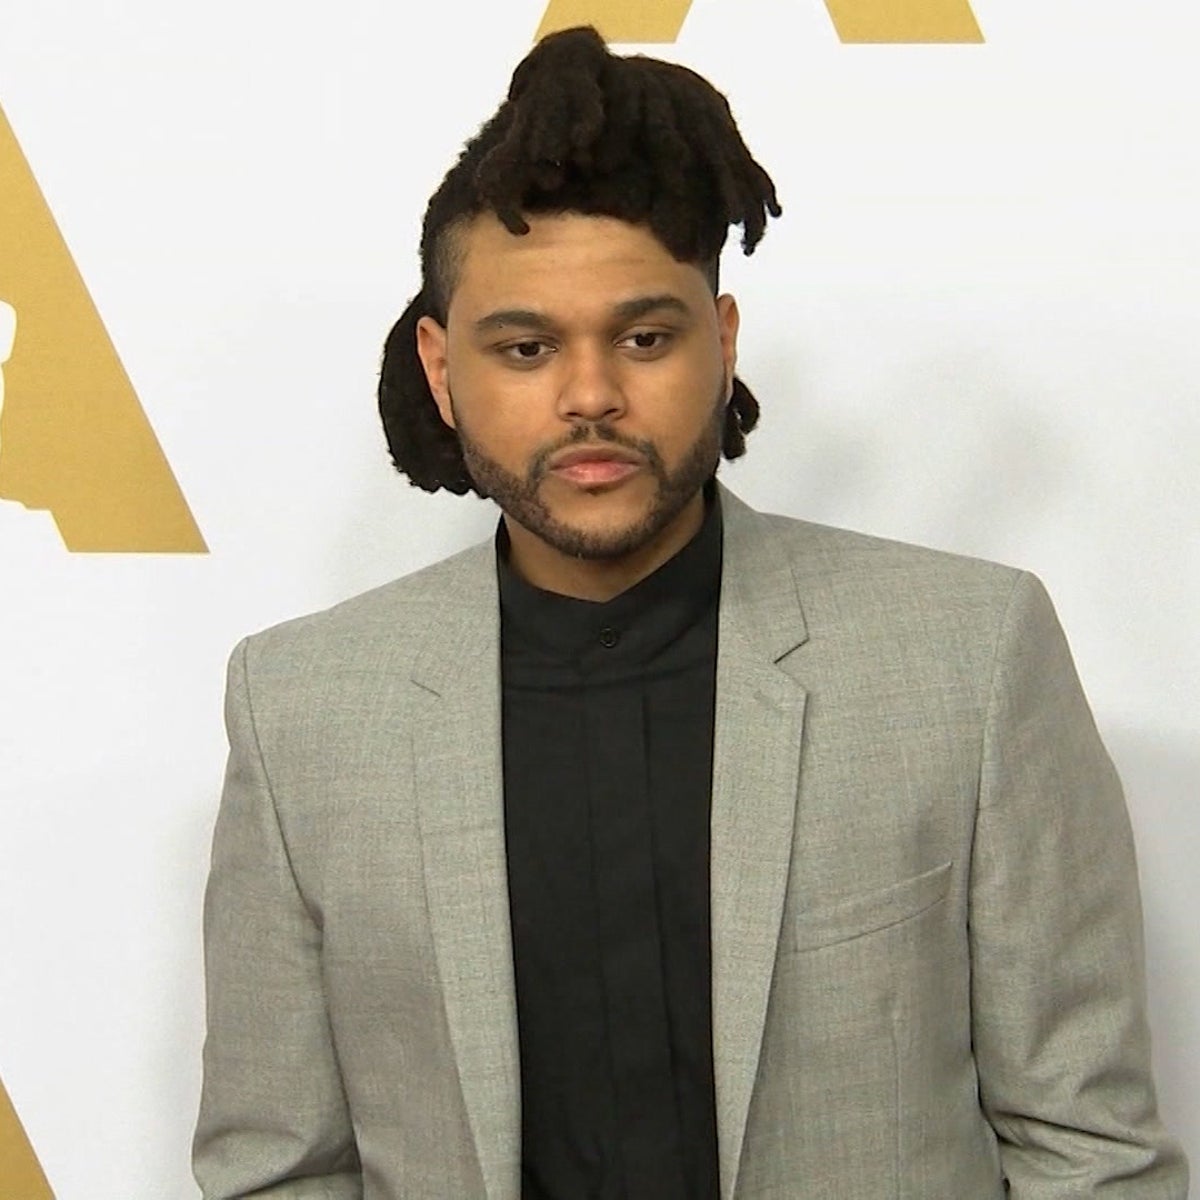 The 10 Best-Dressed Men of the Week  The weeknd, The weeknd merch, The  weeknd albums